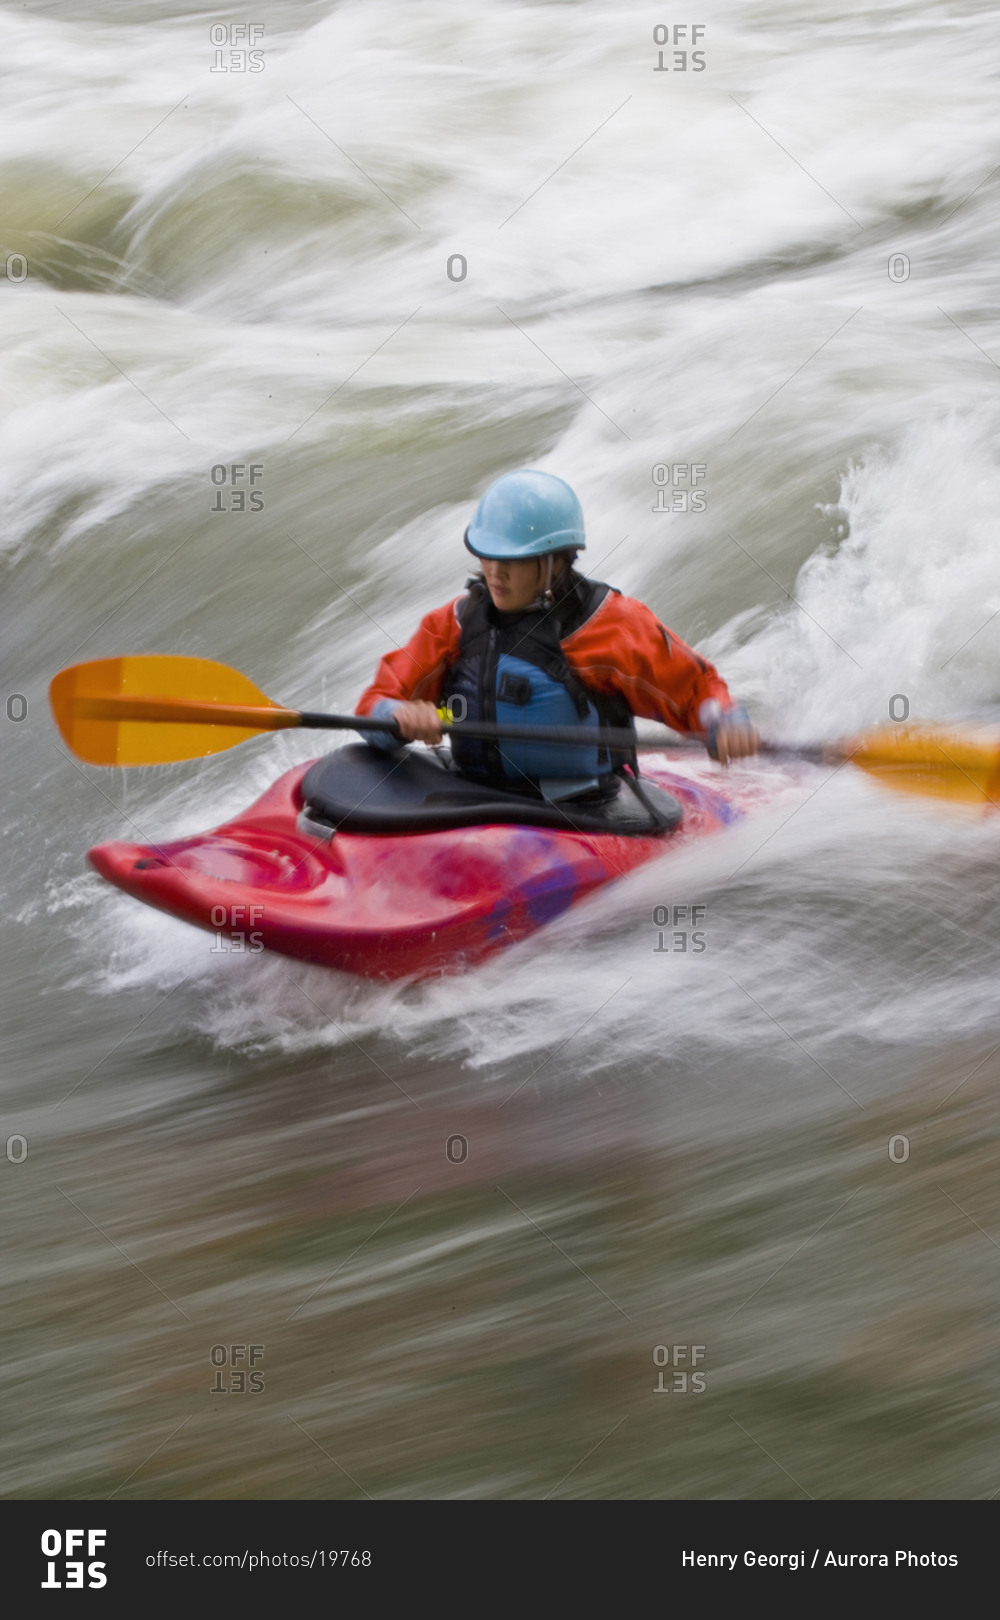 A young, Asian-looking woman surfing a wave in a whitewater kayak, Elk river, East Kootenies, British Columbia, Canada